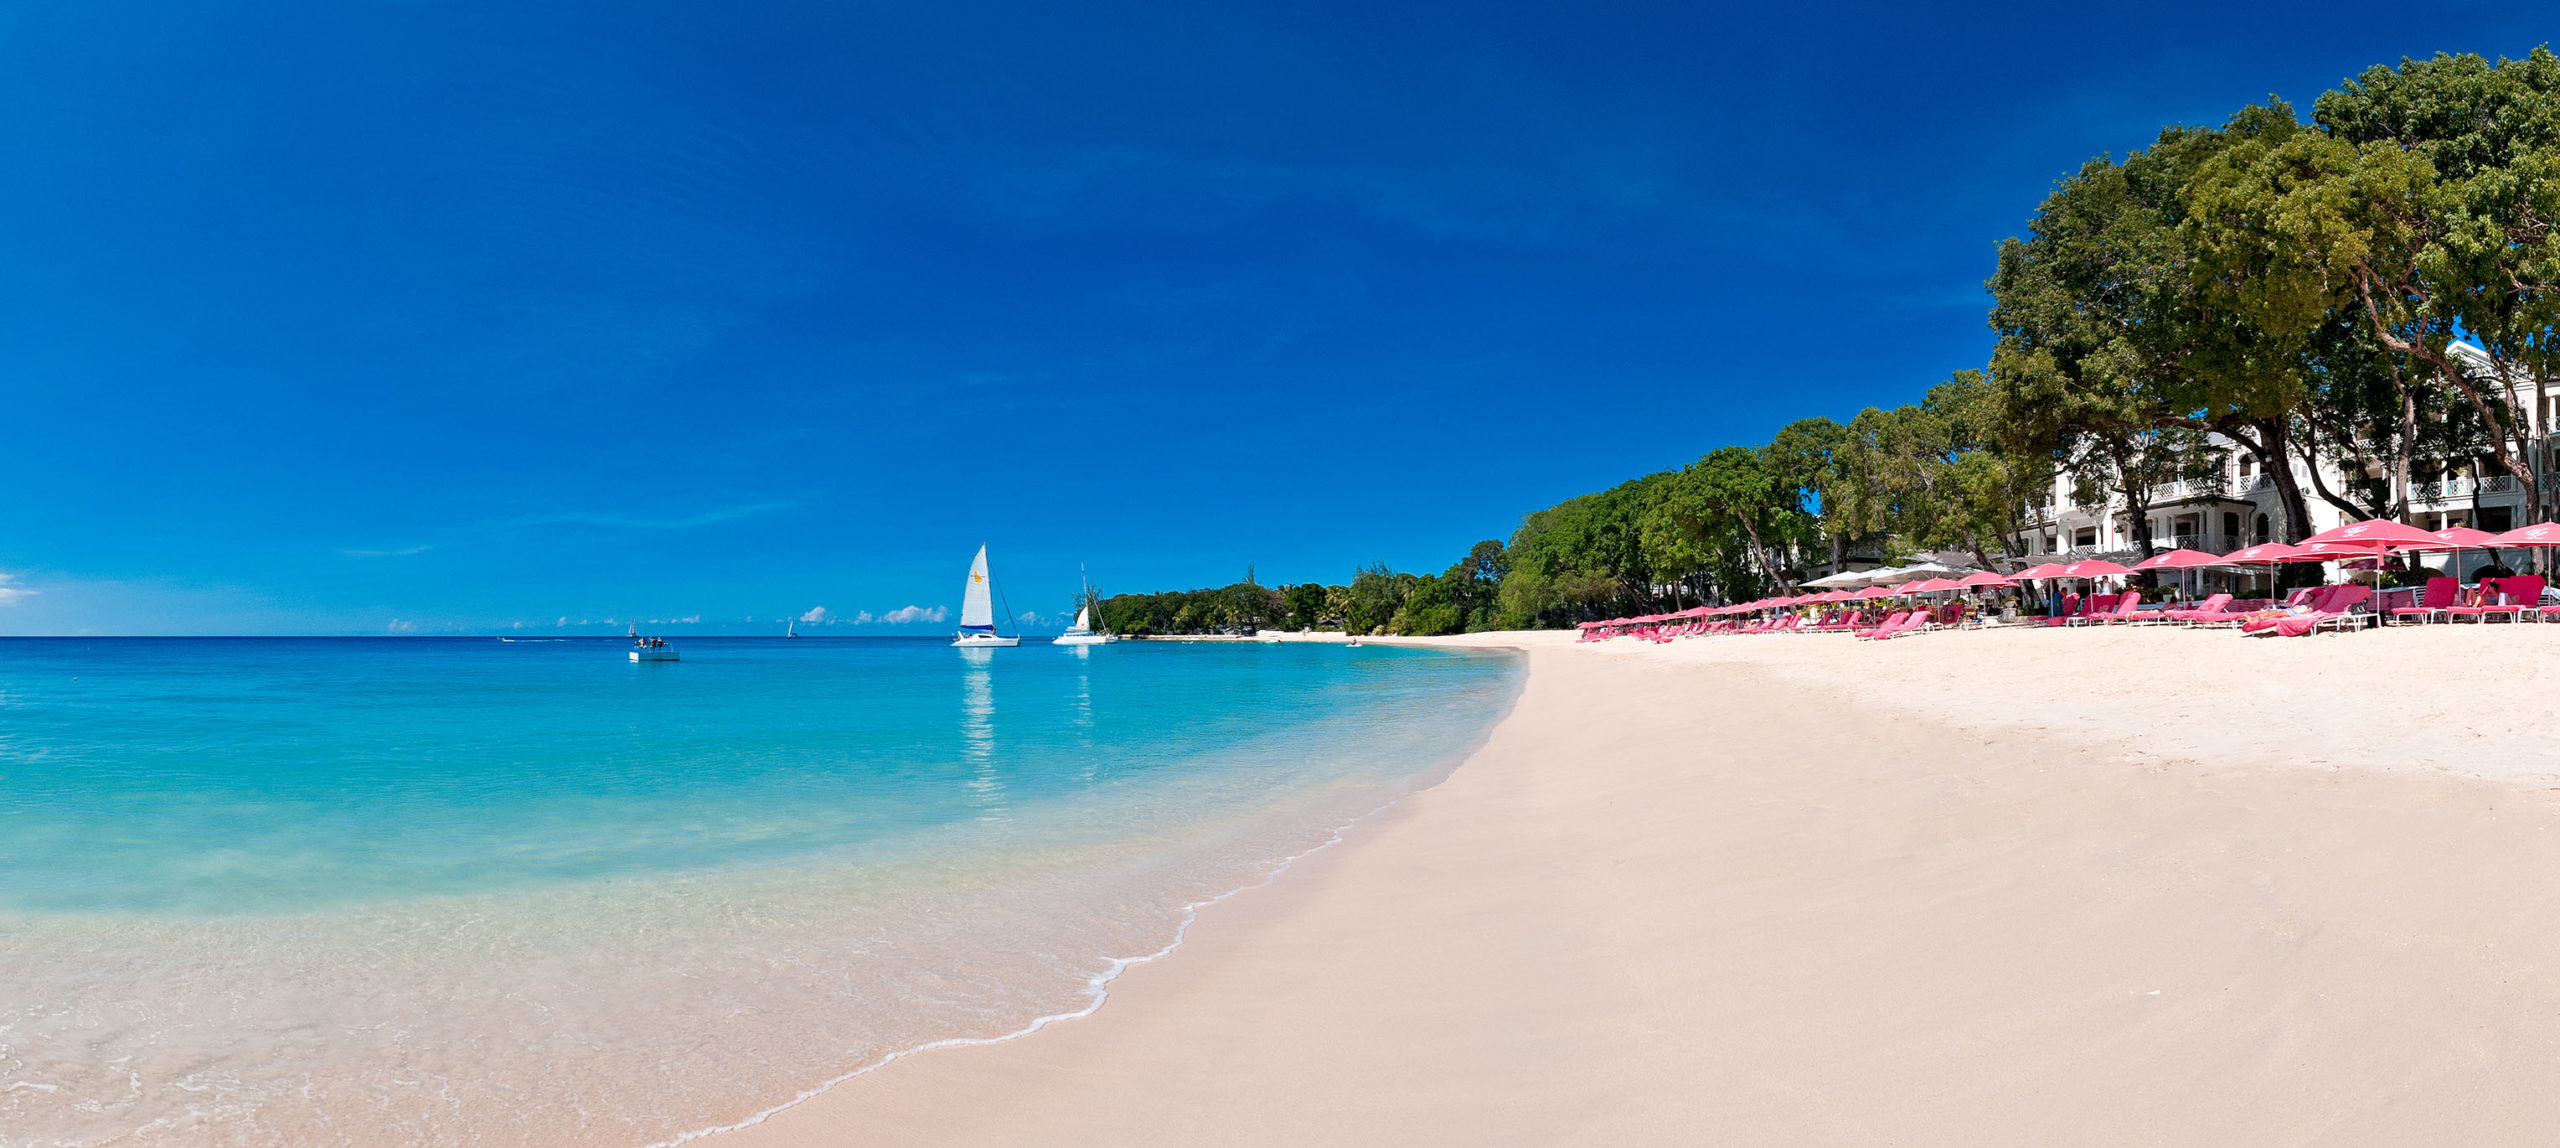 United Airlines to Launch Year-Round Service to Barbados